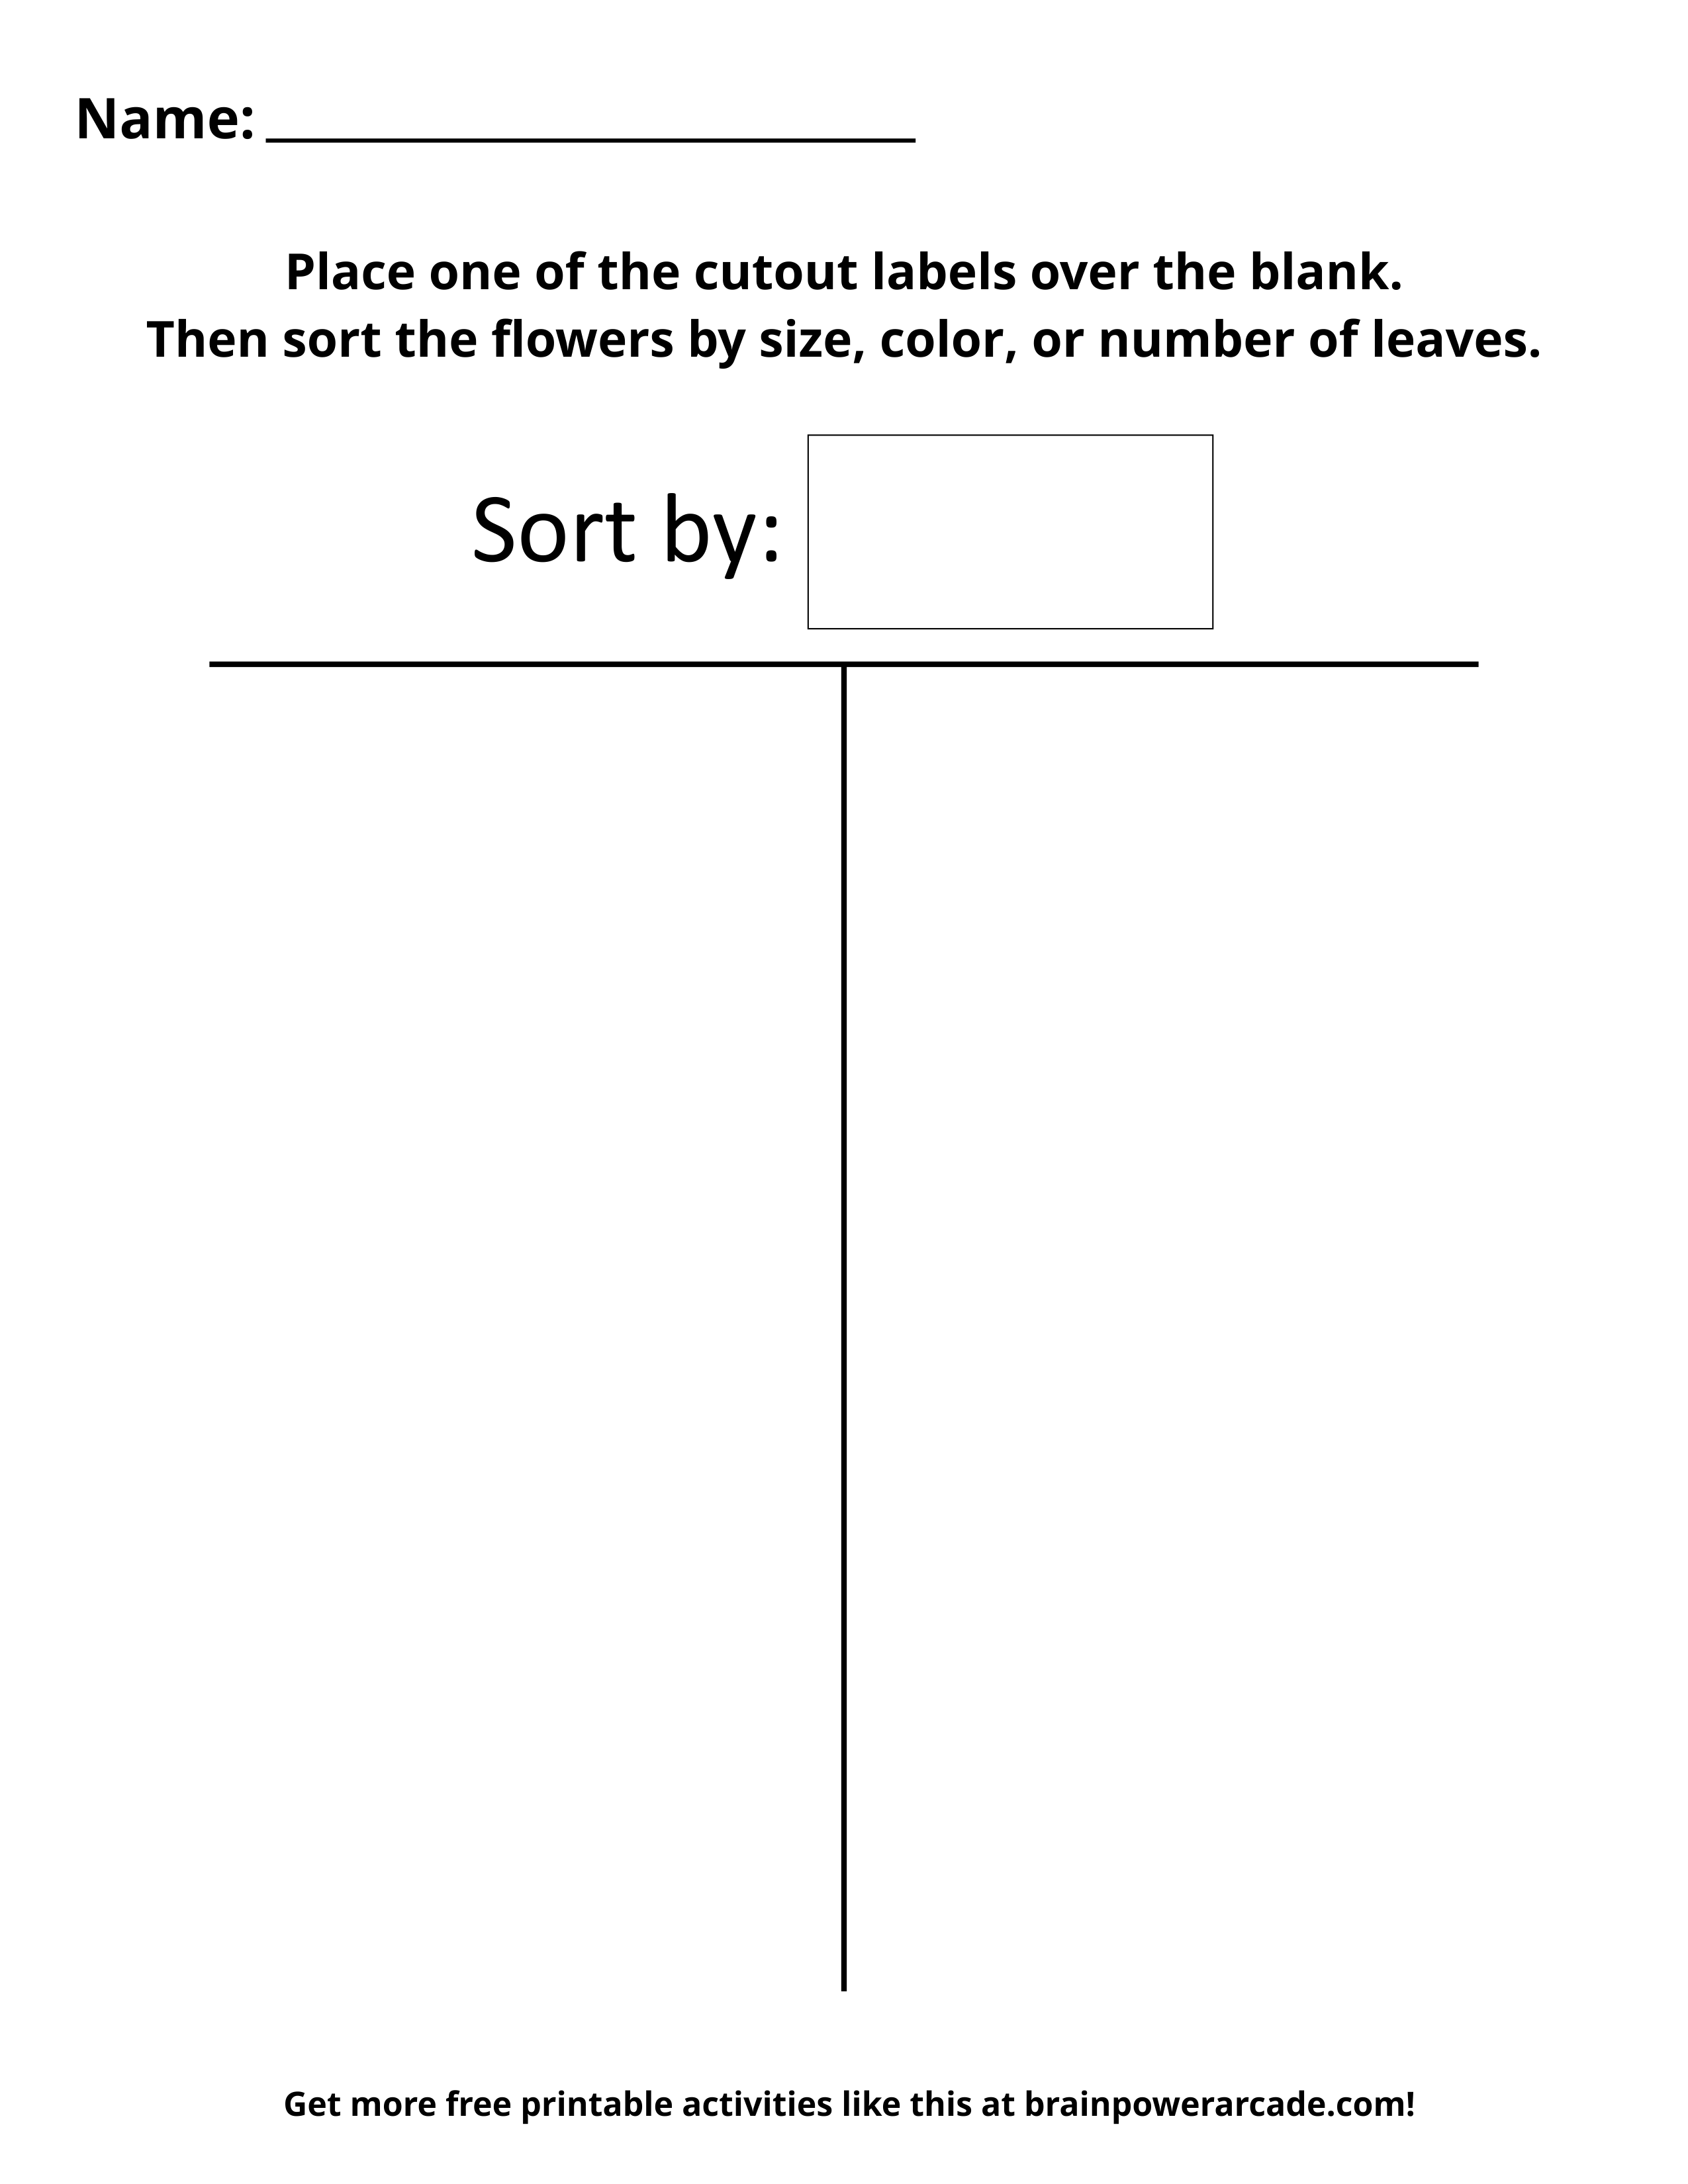 Sort Flowers By Color, Size, or Number of Leaves (Page 1)